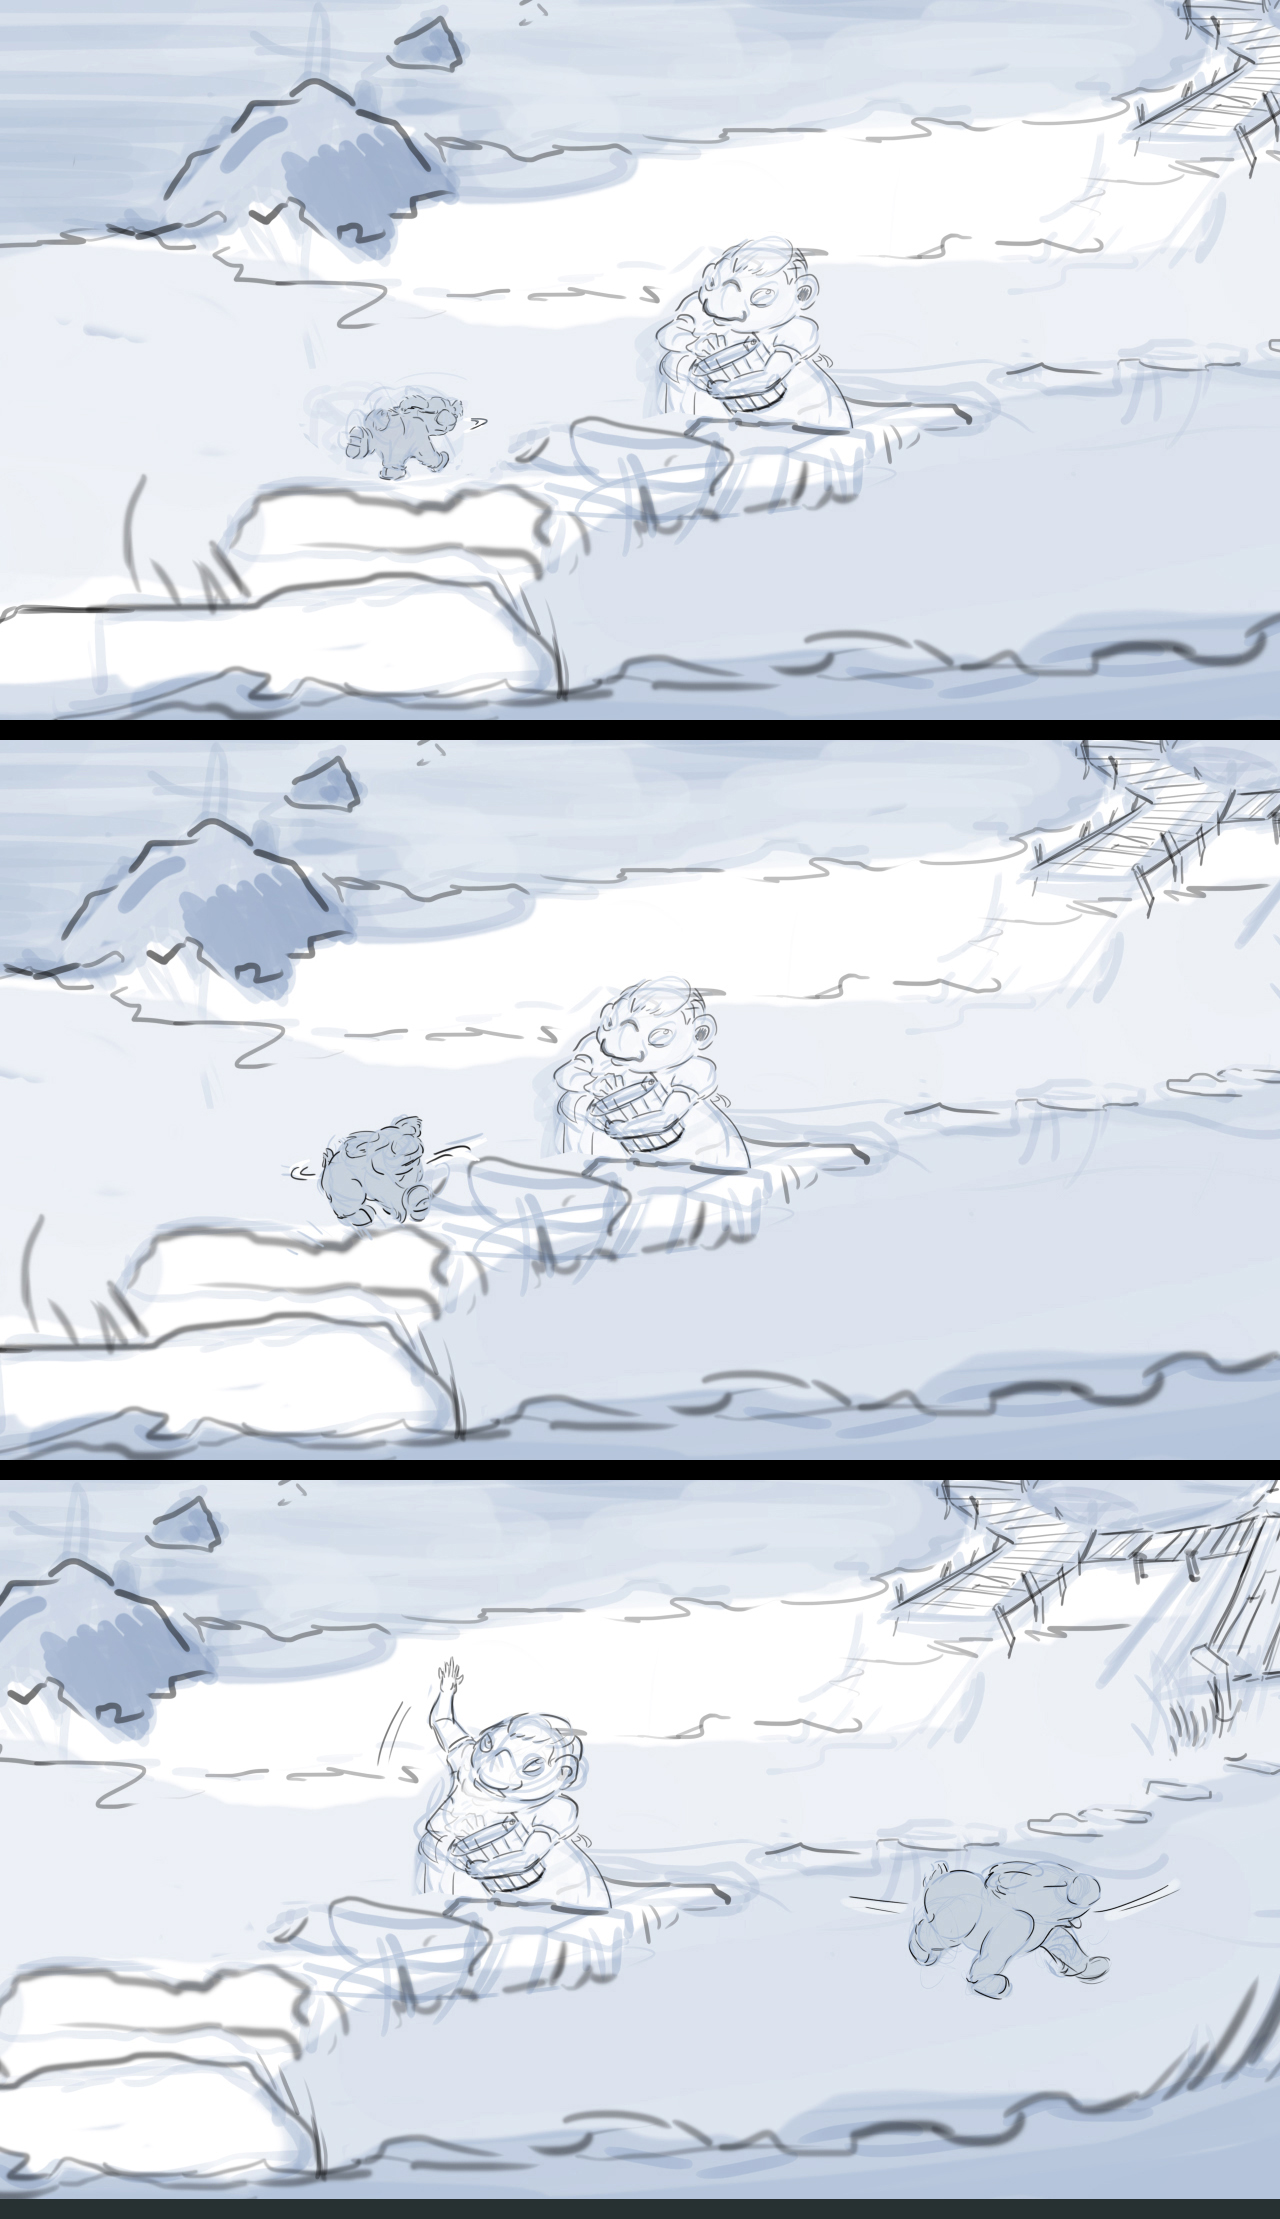 Storyboard sequence from an animated film. Sequence shows reverse angle view of the woman holding the bucket raising her hand in greeting. The dog runs by.